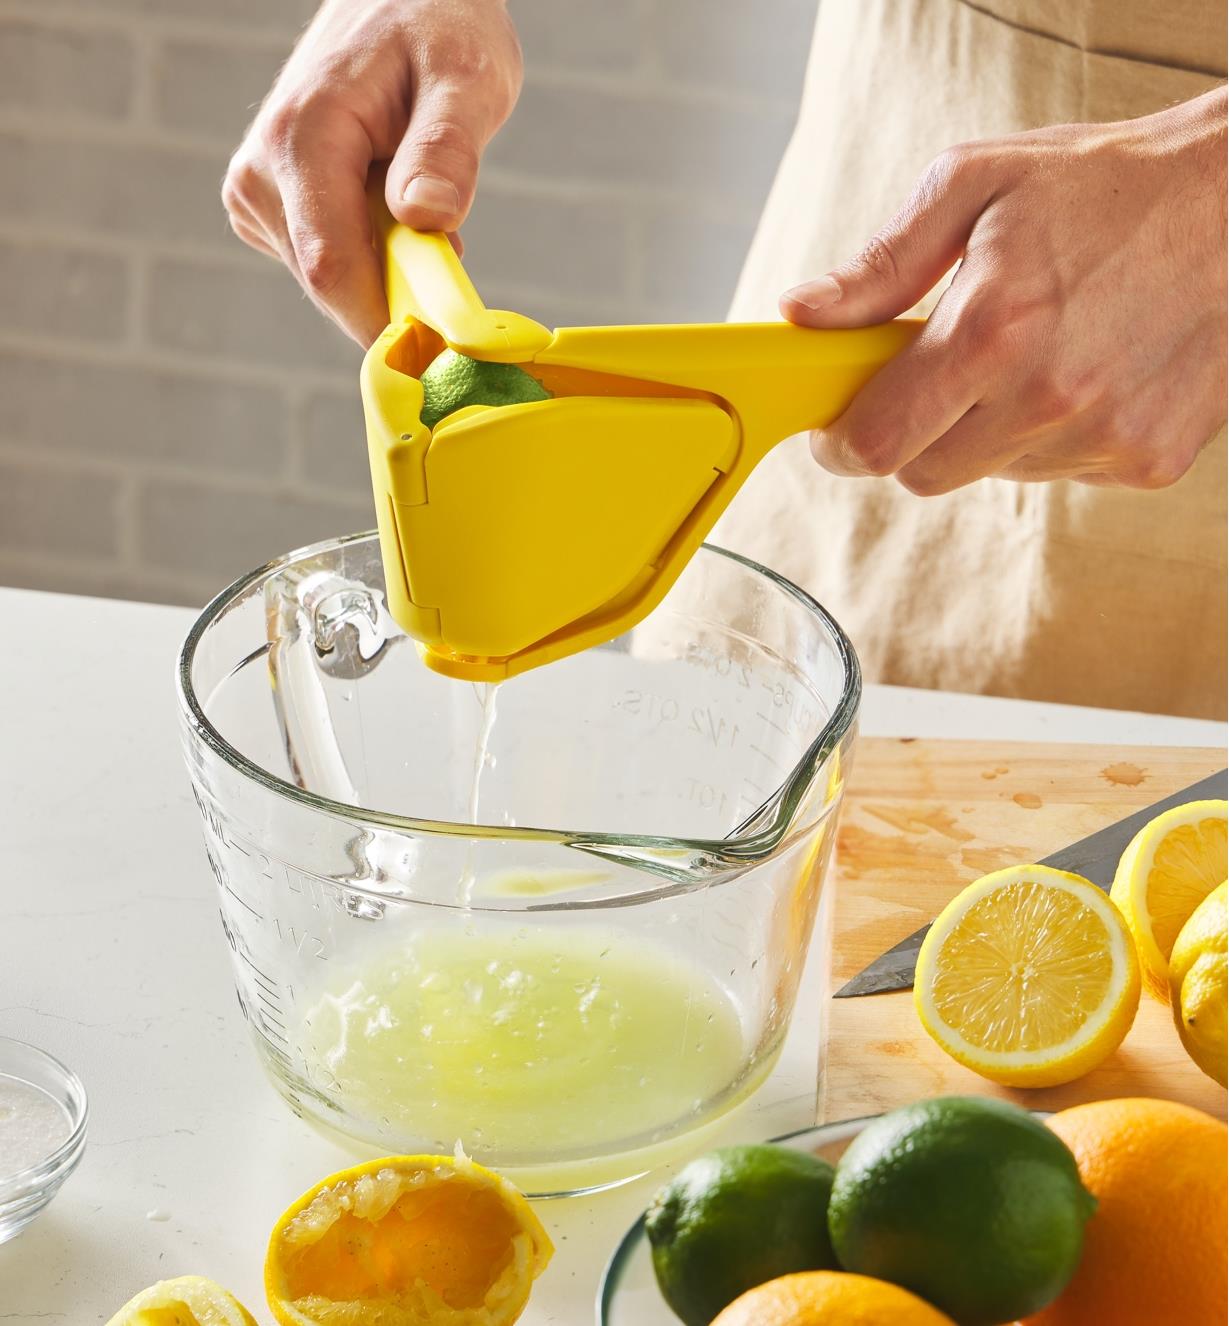 A lime being squeezed in a juicer over a measuring cup